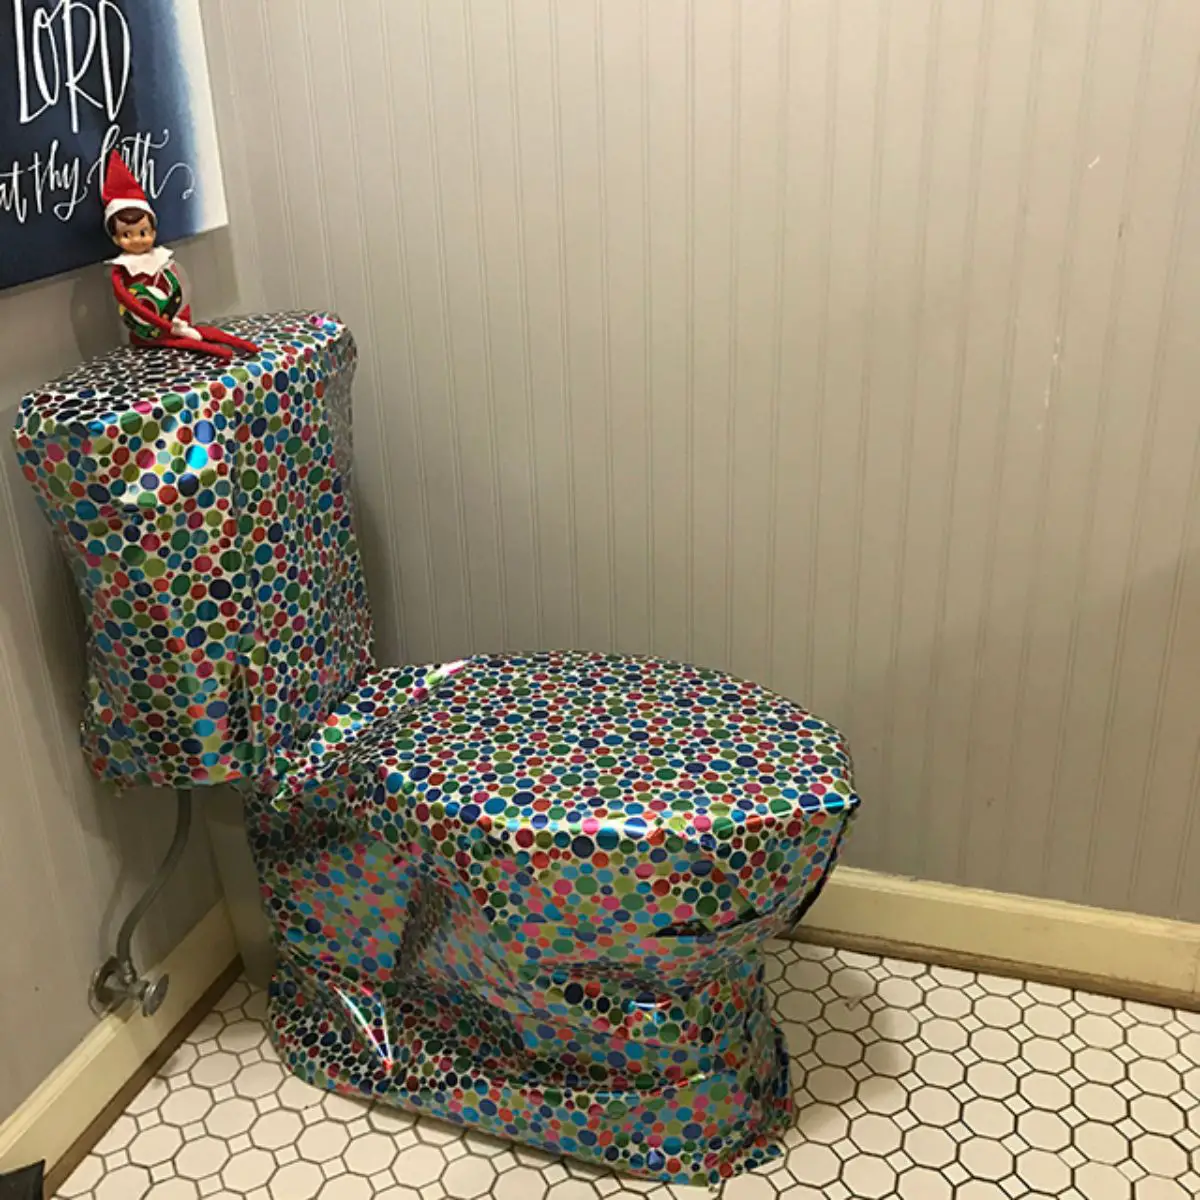 Elf on the shelf wrapped a toilet